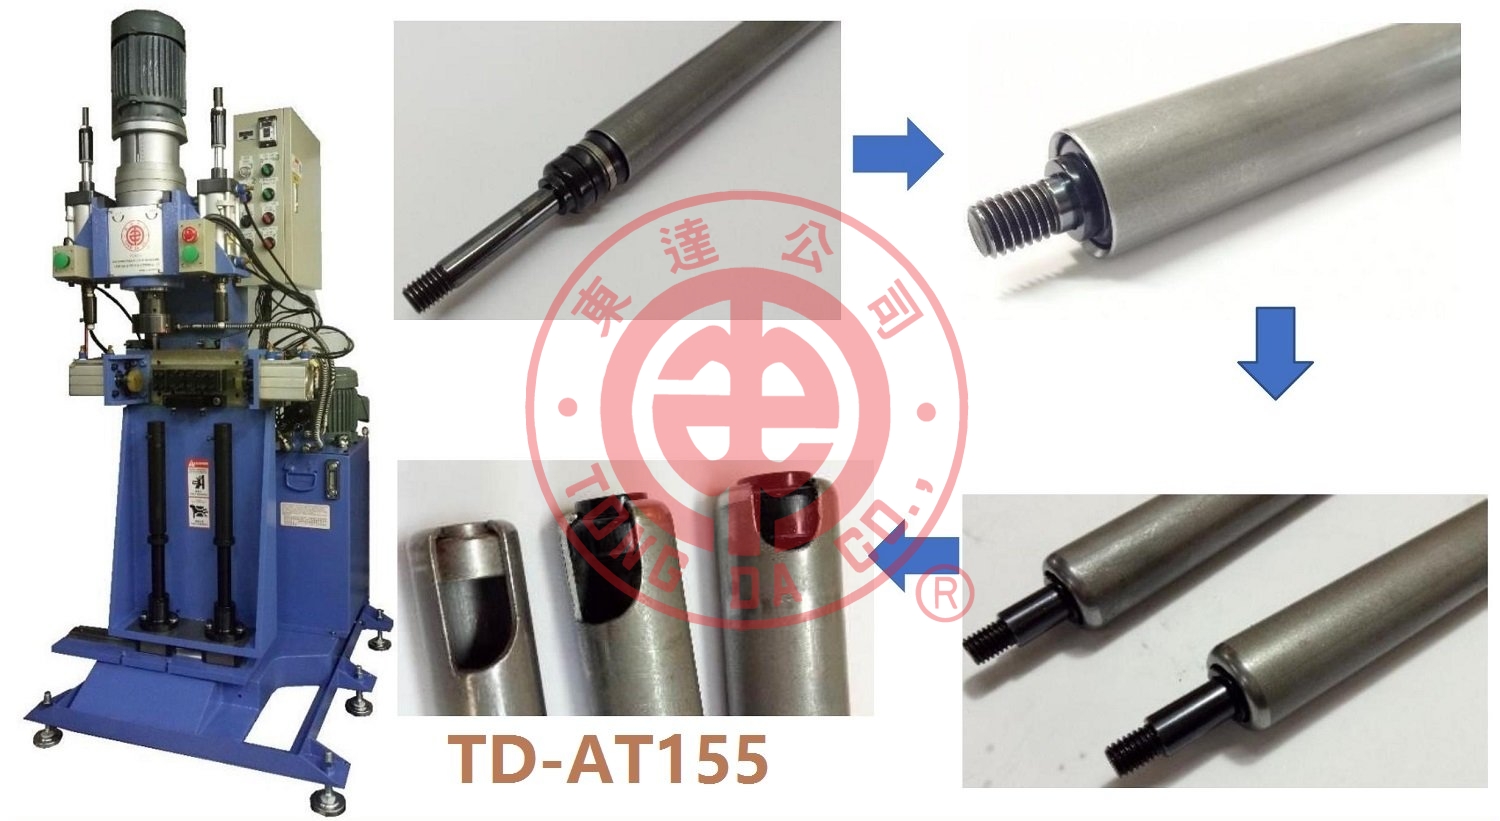 TD-AT155 PRESS GAS SPRING COMPONENTS AND CLOSING GAS SPRING TUBE MACHINE(FOR GAS SPRING)